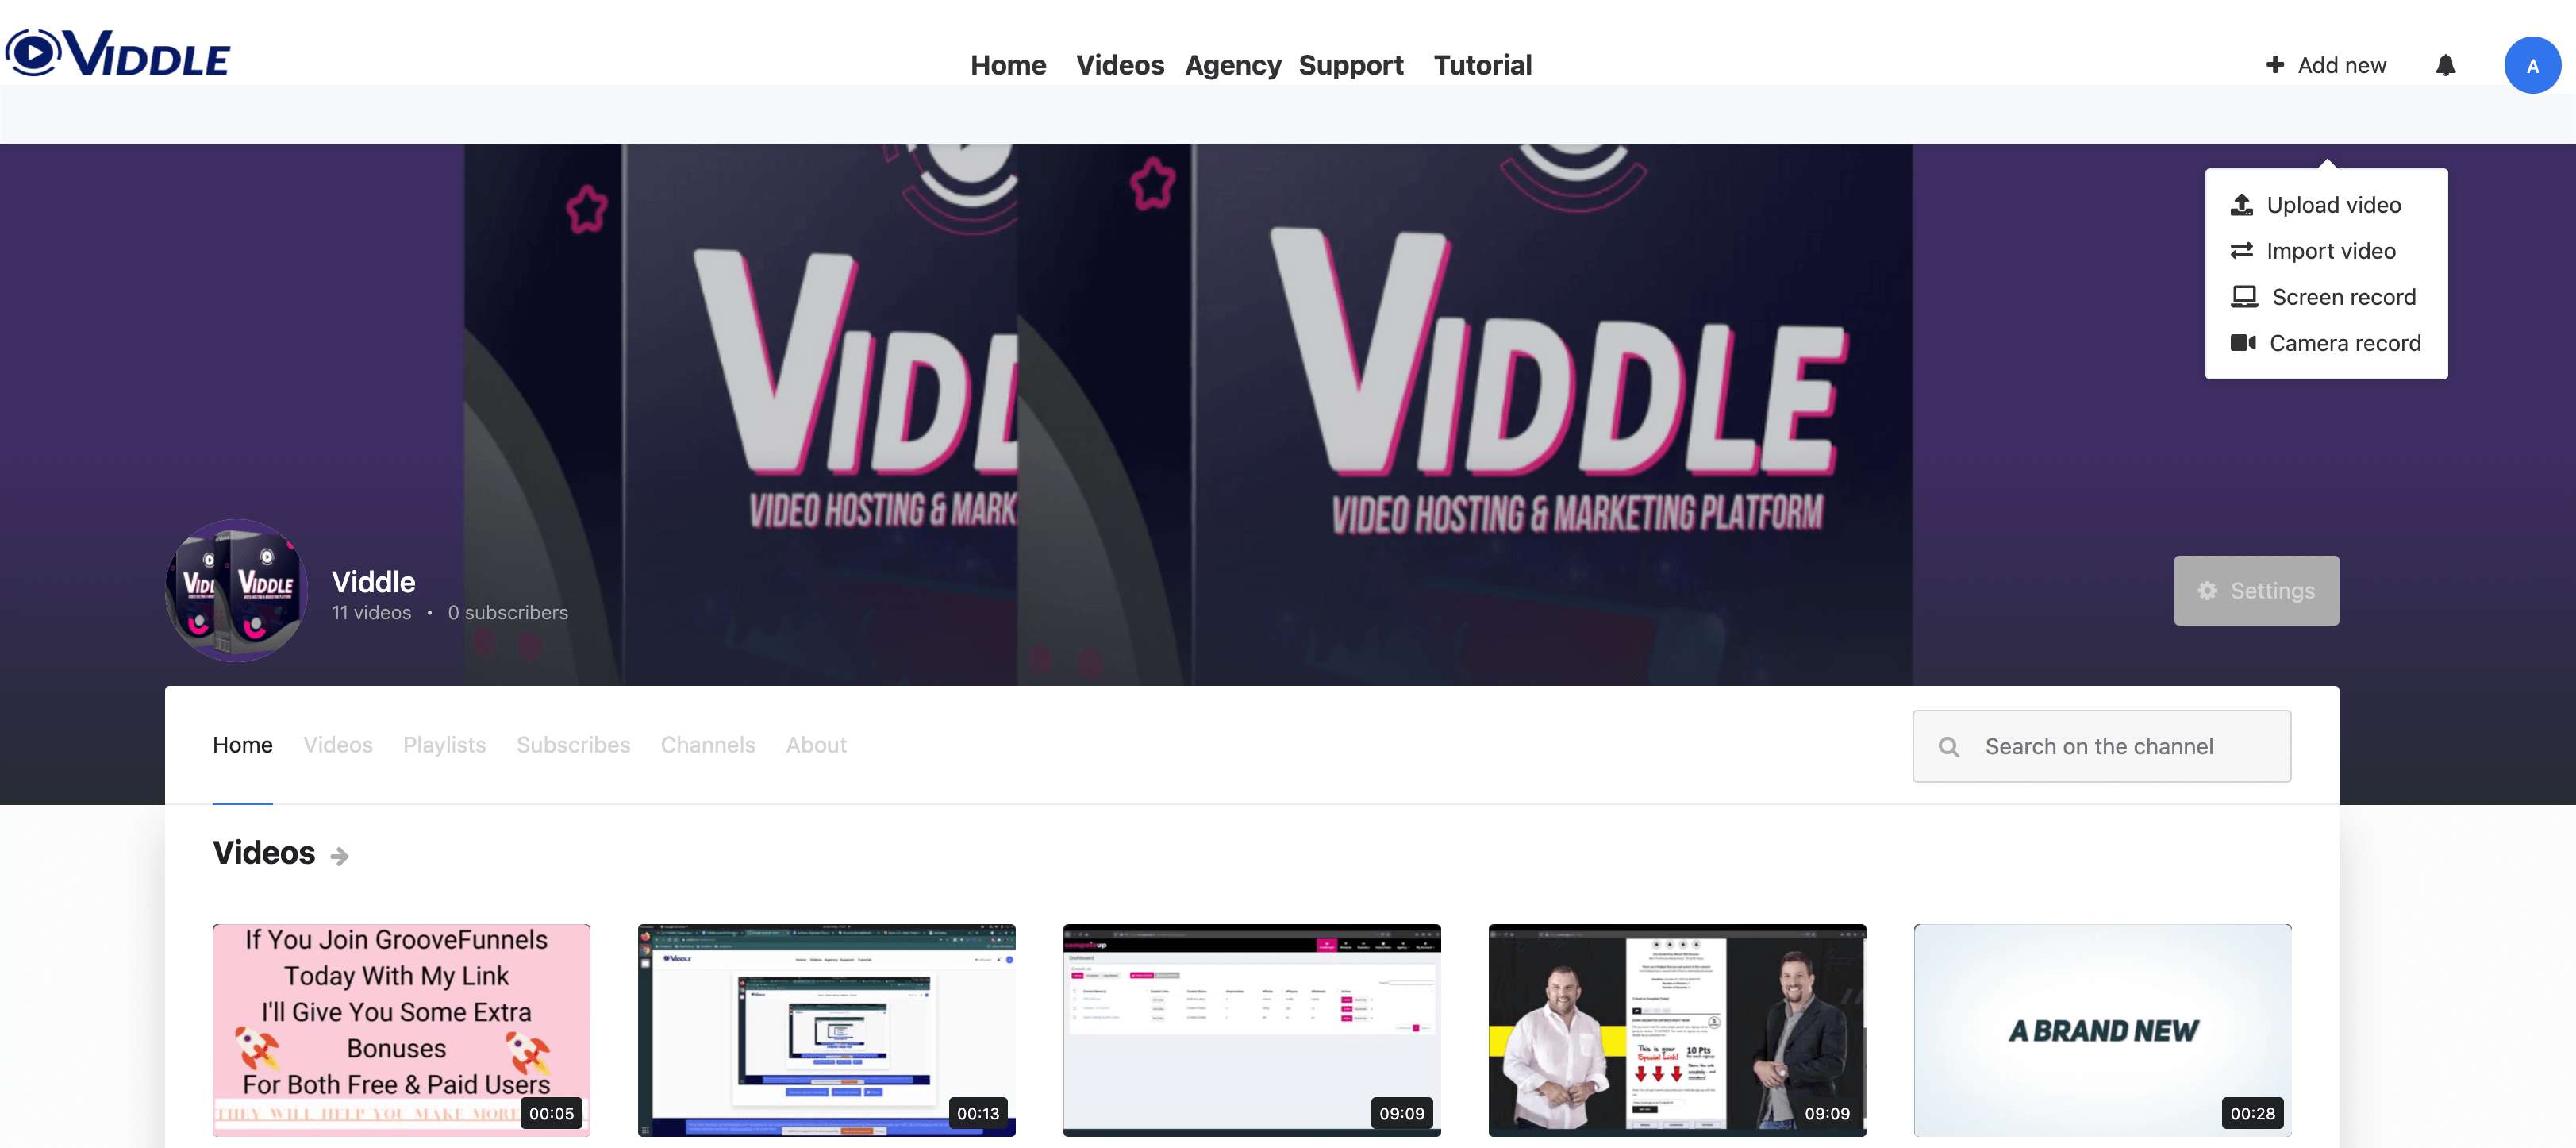 viddle review: account dashboard